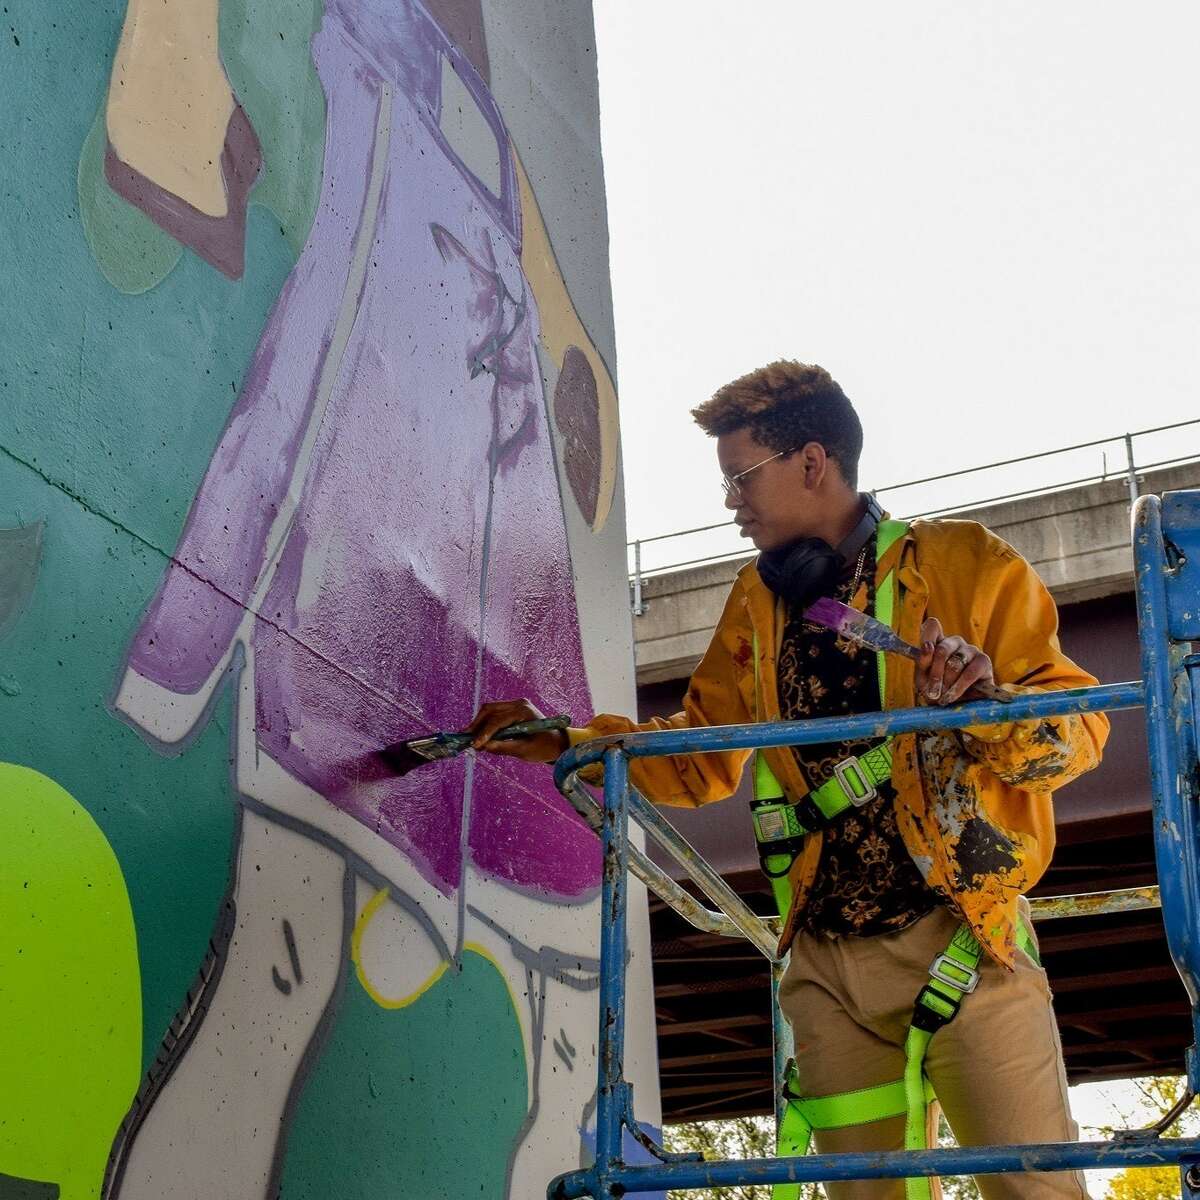  Jade Warrick, artist and founder of Amplified Voices NY, works on one of her murals.